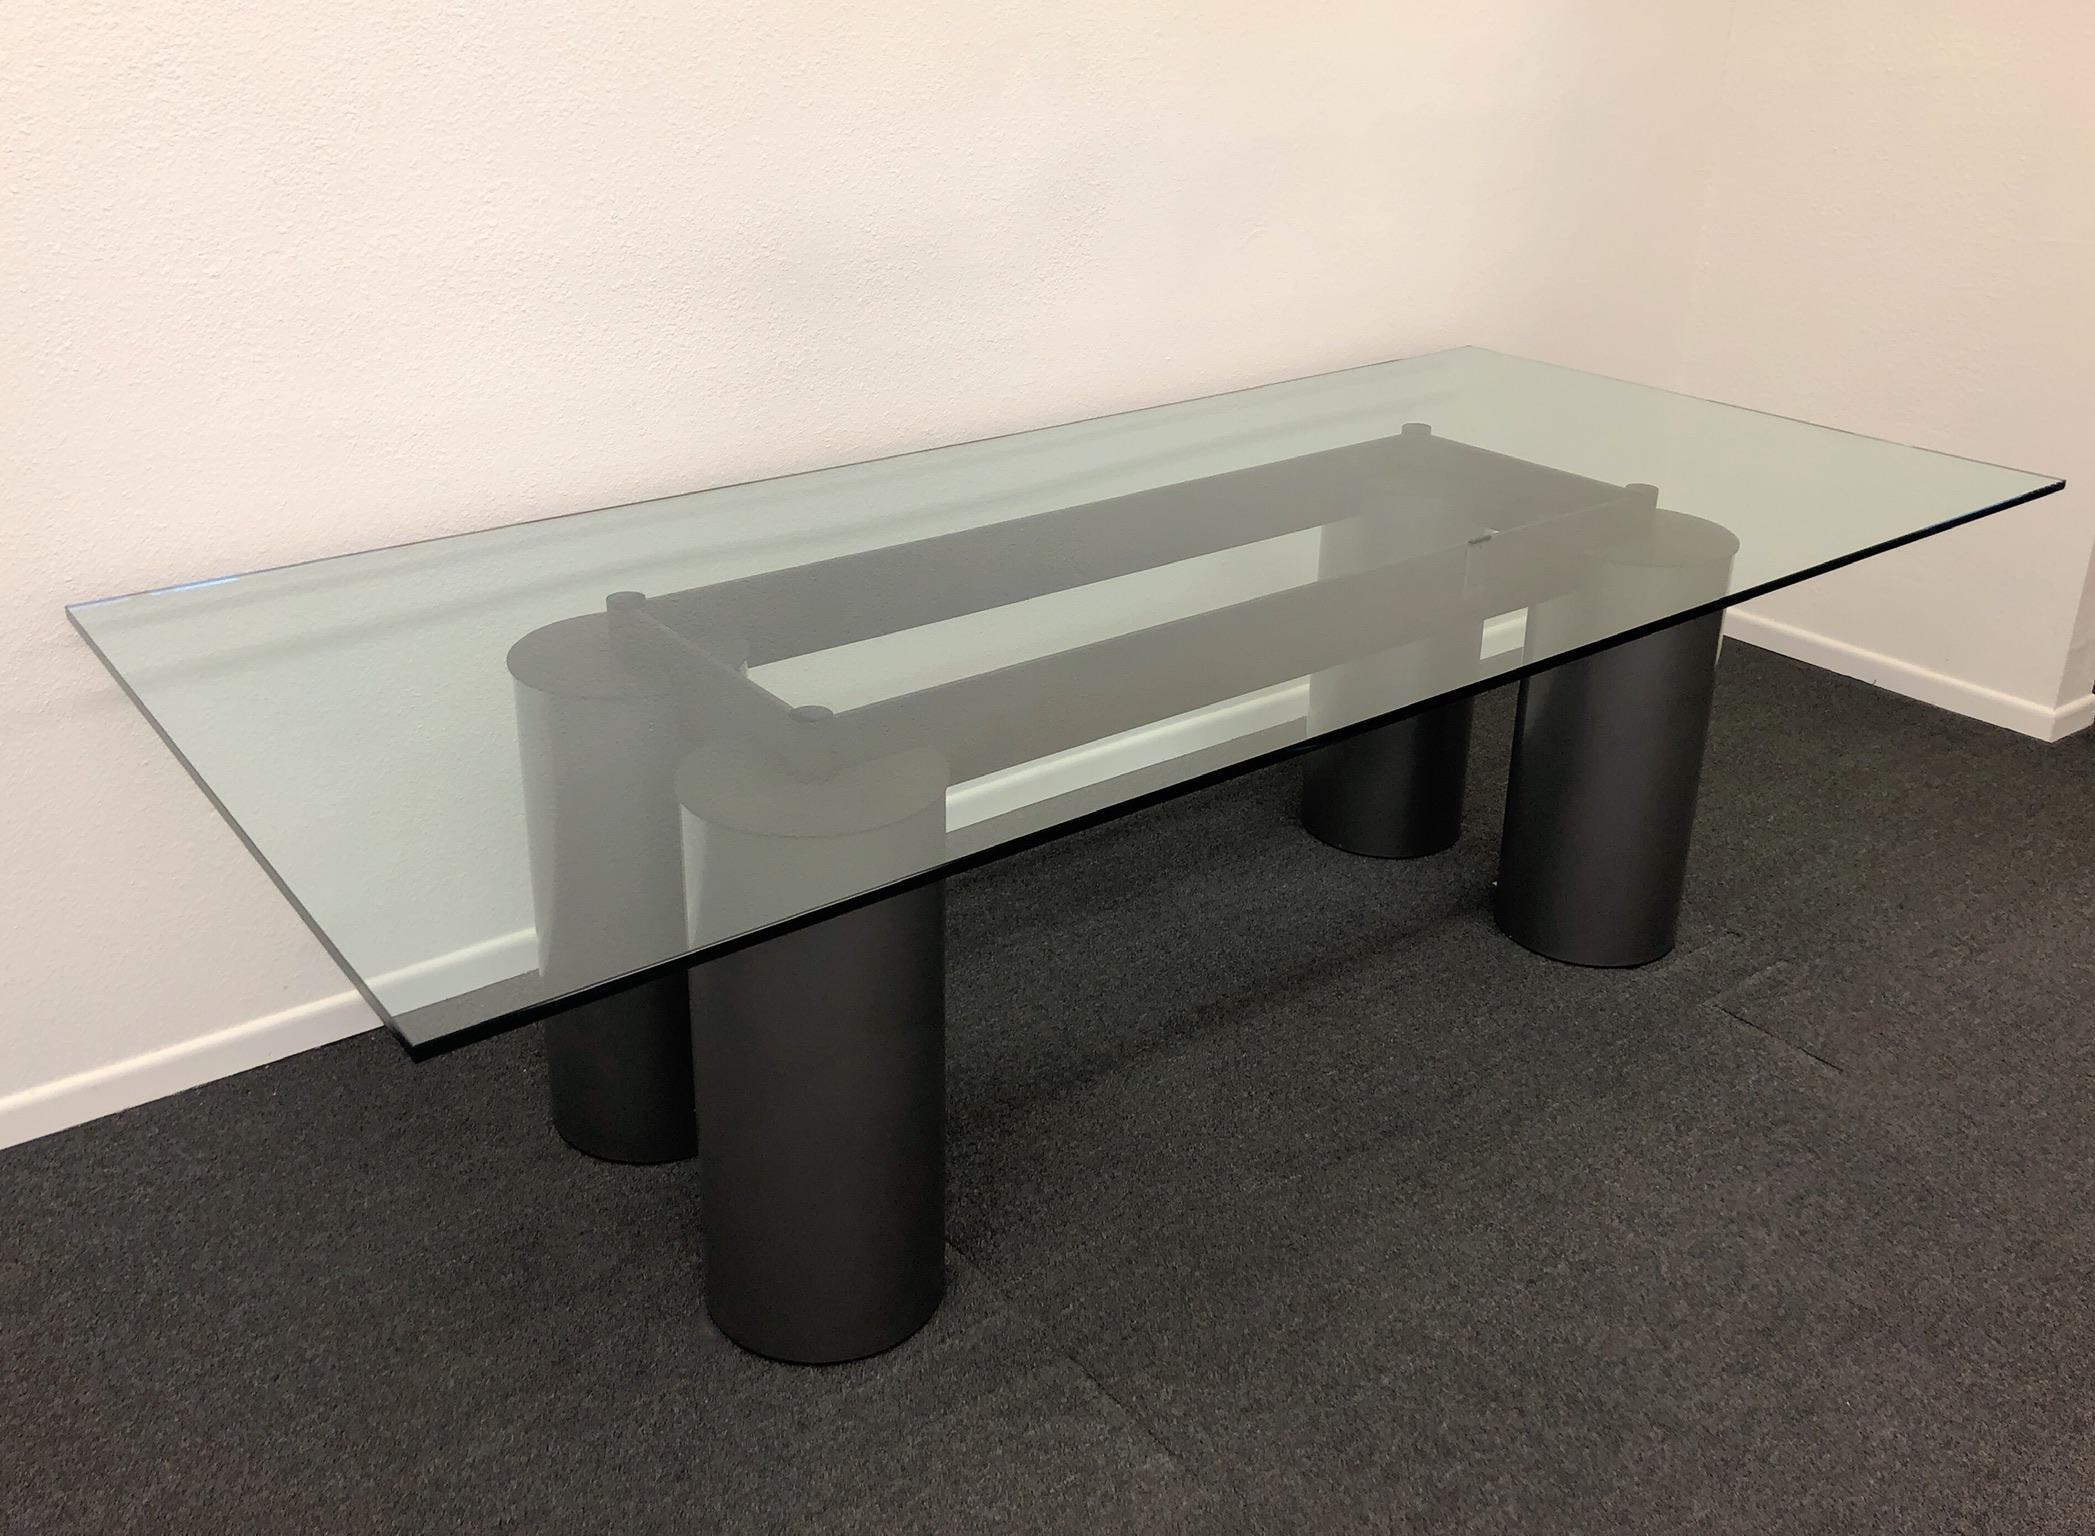 Italian Postmodern Memphis dining table designed by David Law, Lella & Massimo Vignelli for Acerbis International in the 1980s. The table is constructed of powder coated steel and glass. The cylinder legs are metallic gray powder coated steel. The